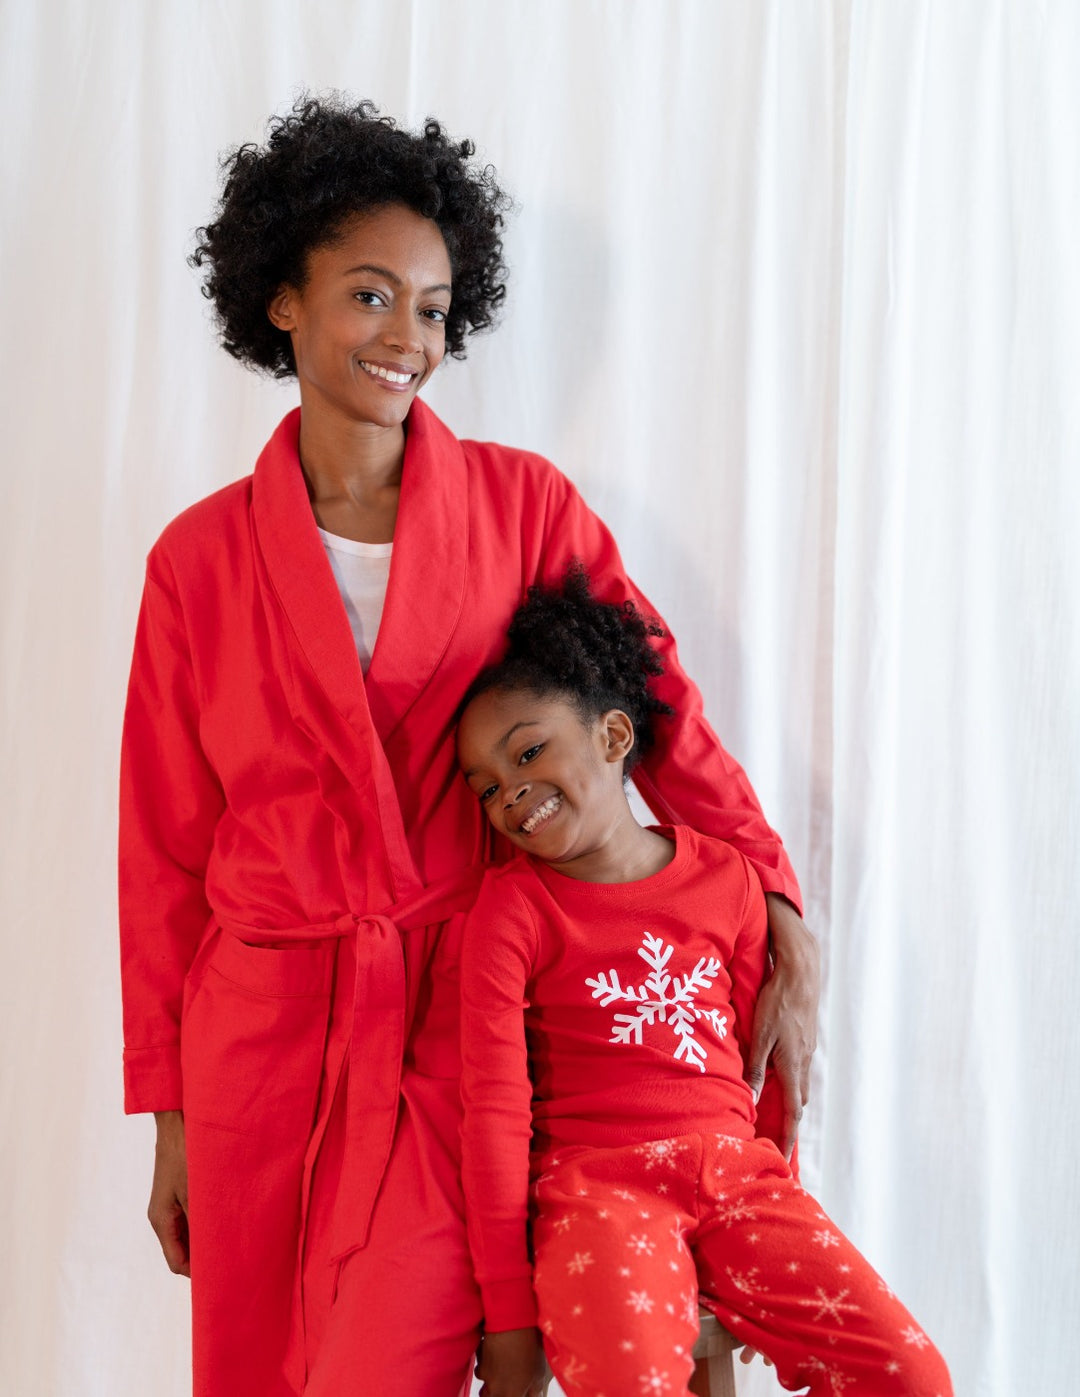 Robes for Women  Women's Robes and Bathrobes by Leveret – Leveret Clothing